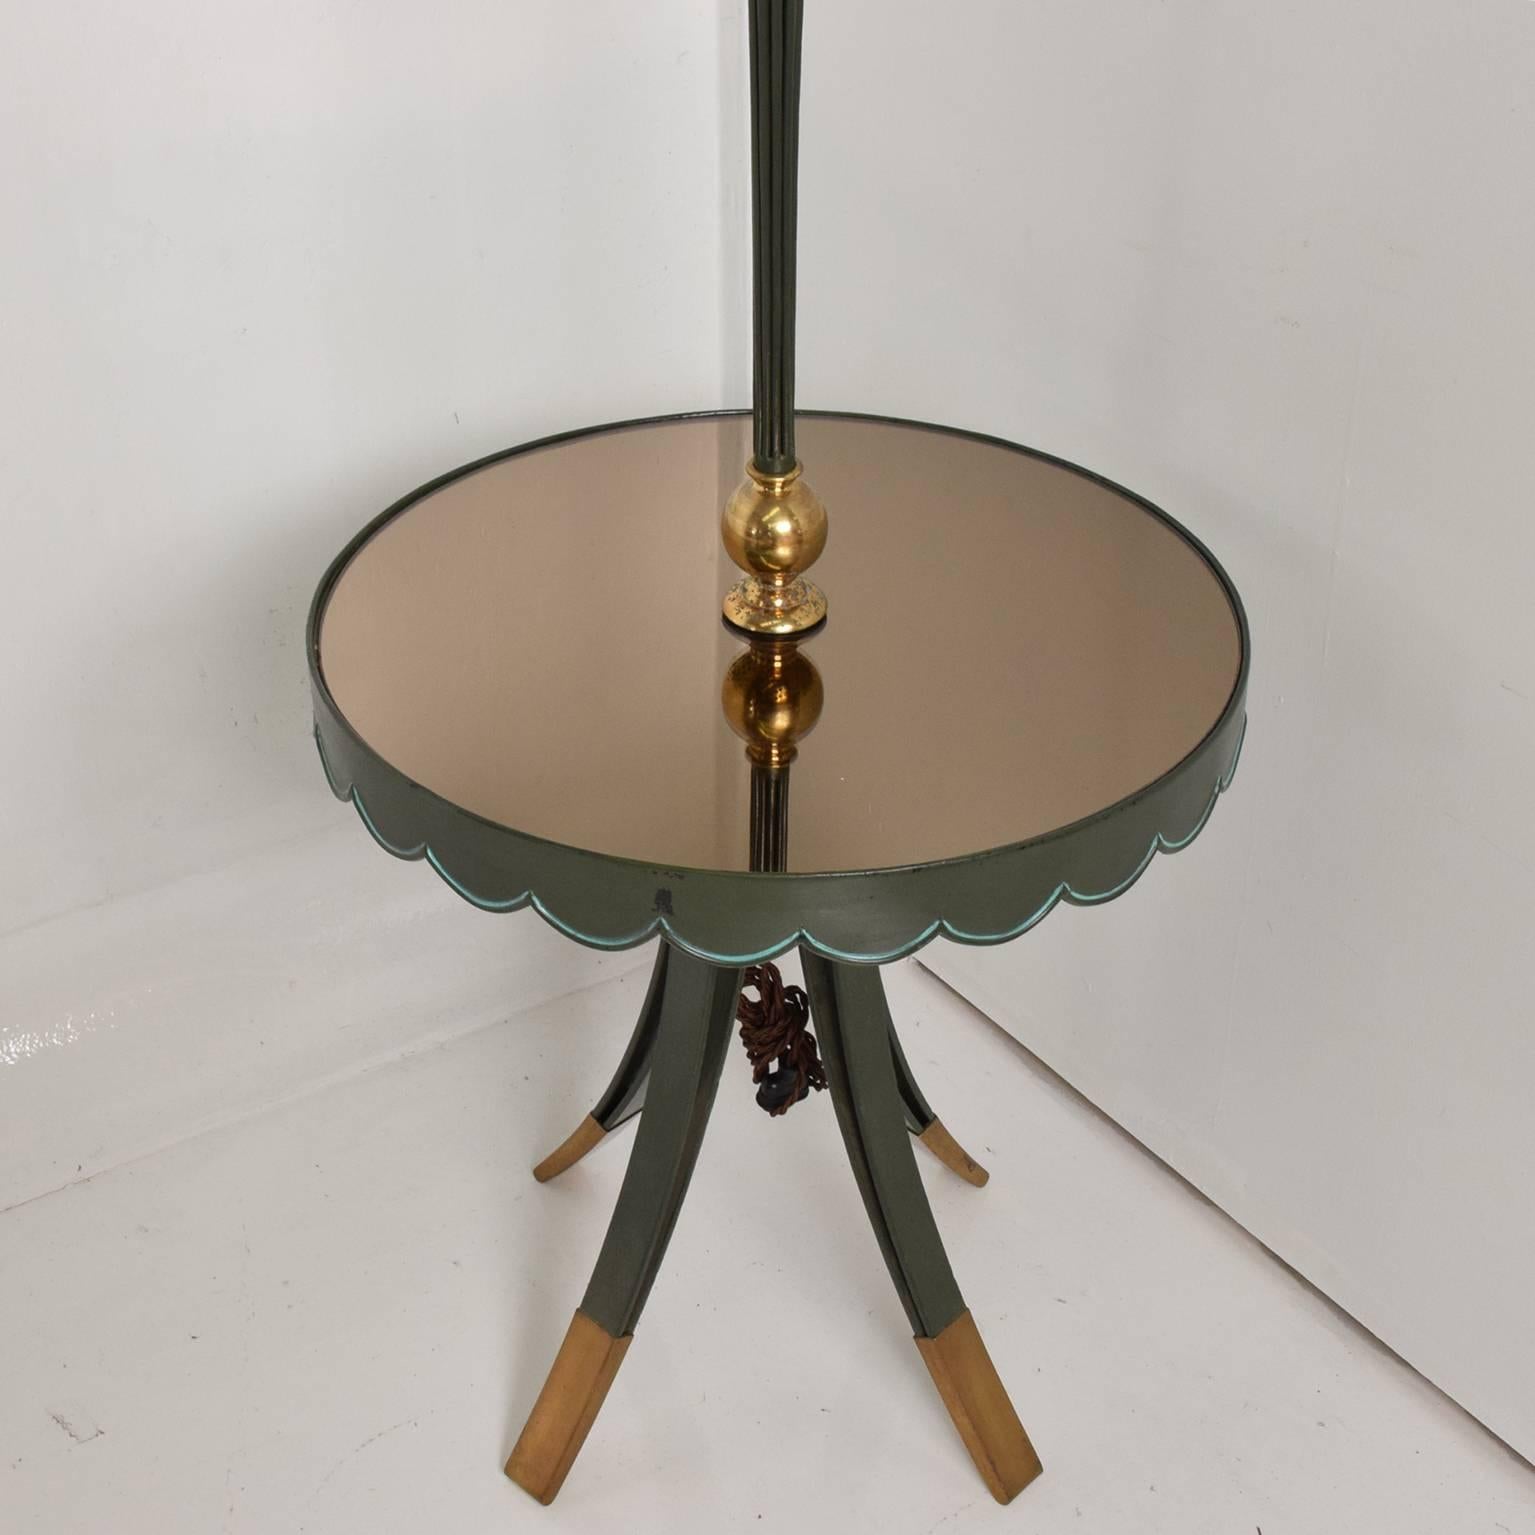 Arturo Pani Refined Elegance Floor Lamp with Scalloped Table Mexico City 1940s 1